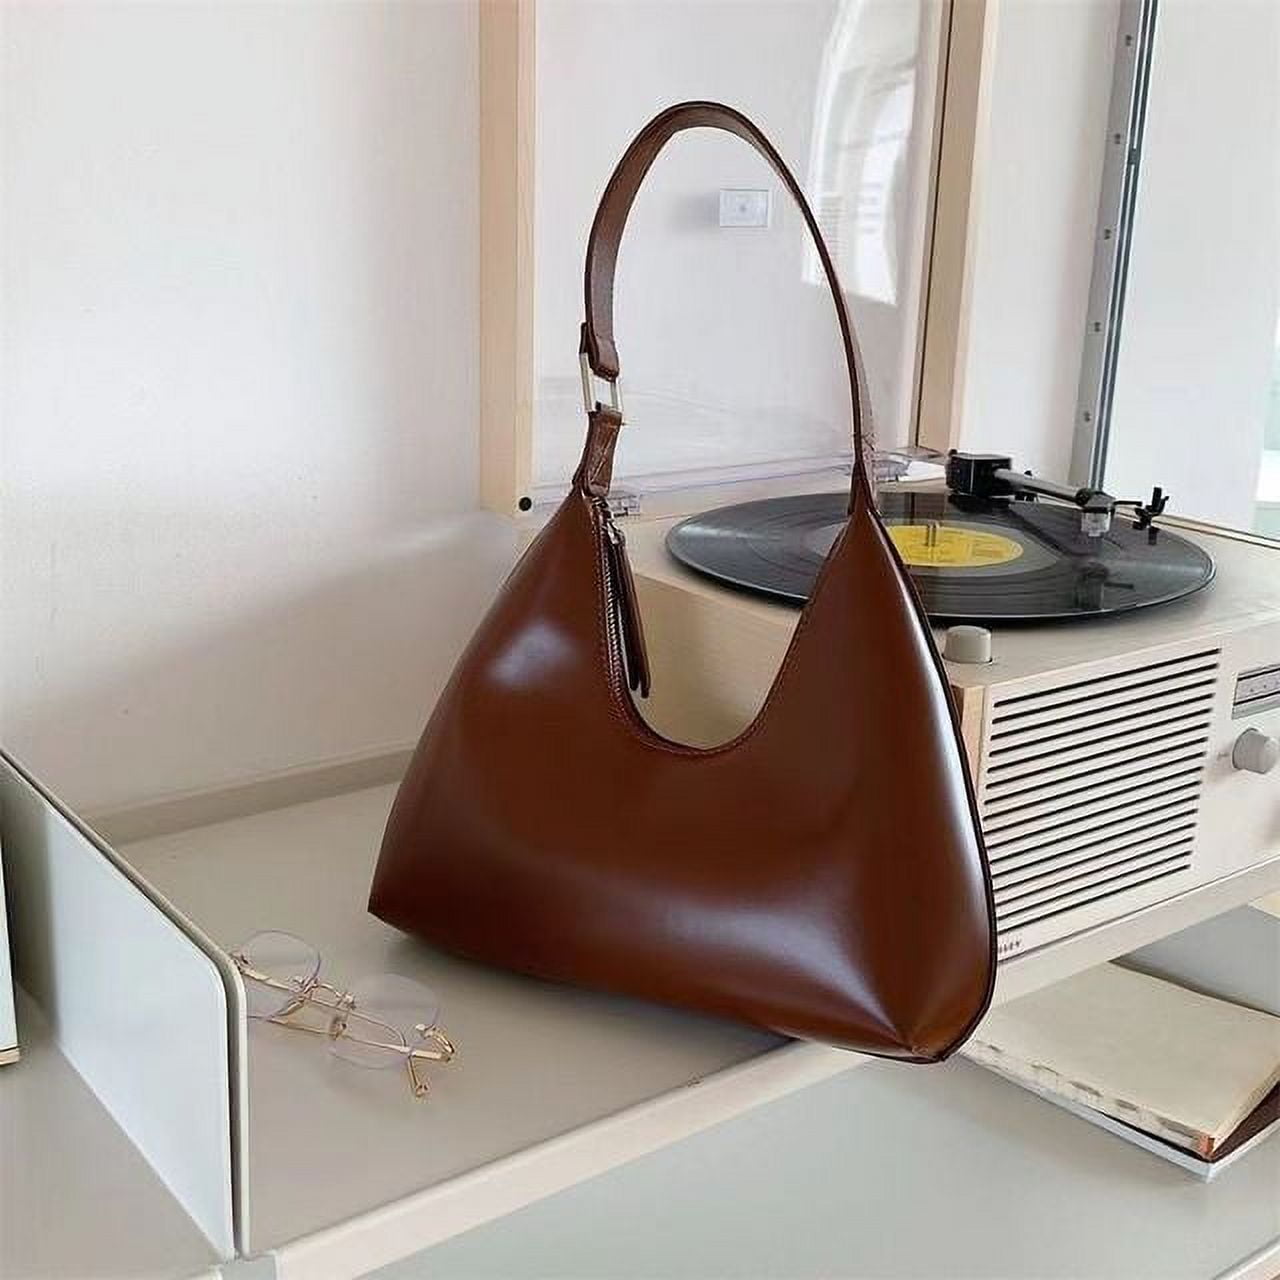 Small Hobo Bags for Women Dumpling Shoulder Bag Soft Leather Ladies Clutch Purses with Adjustable Strap | Cluci, Brown